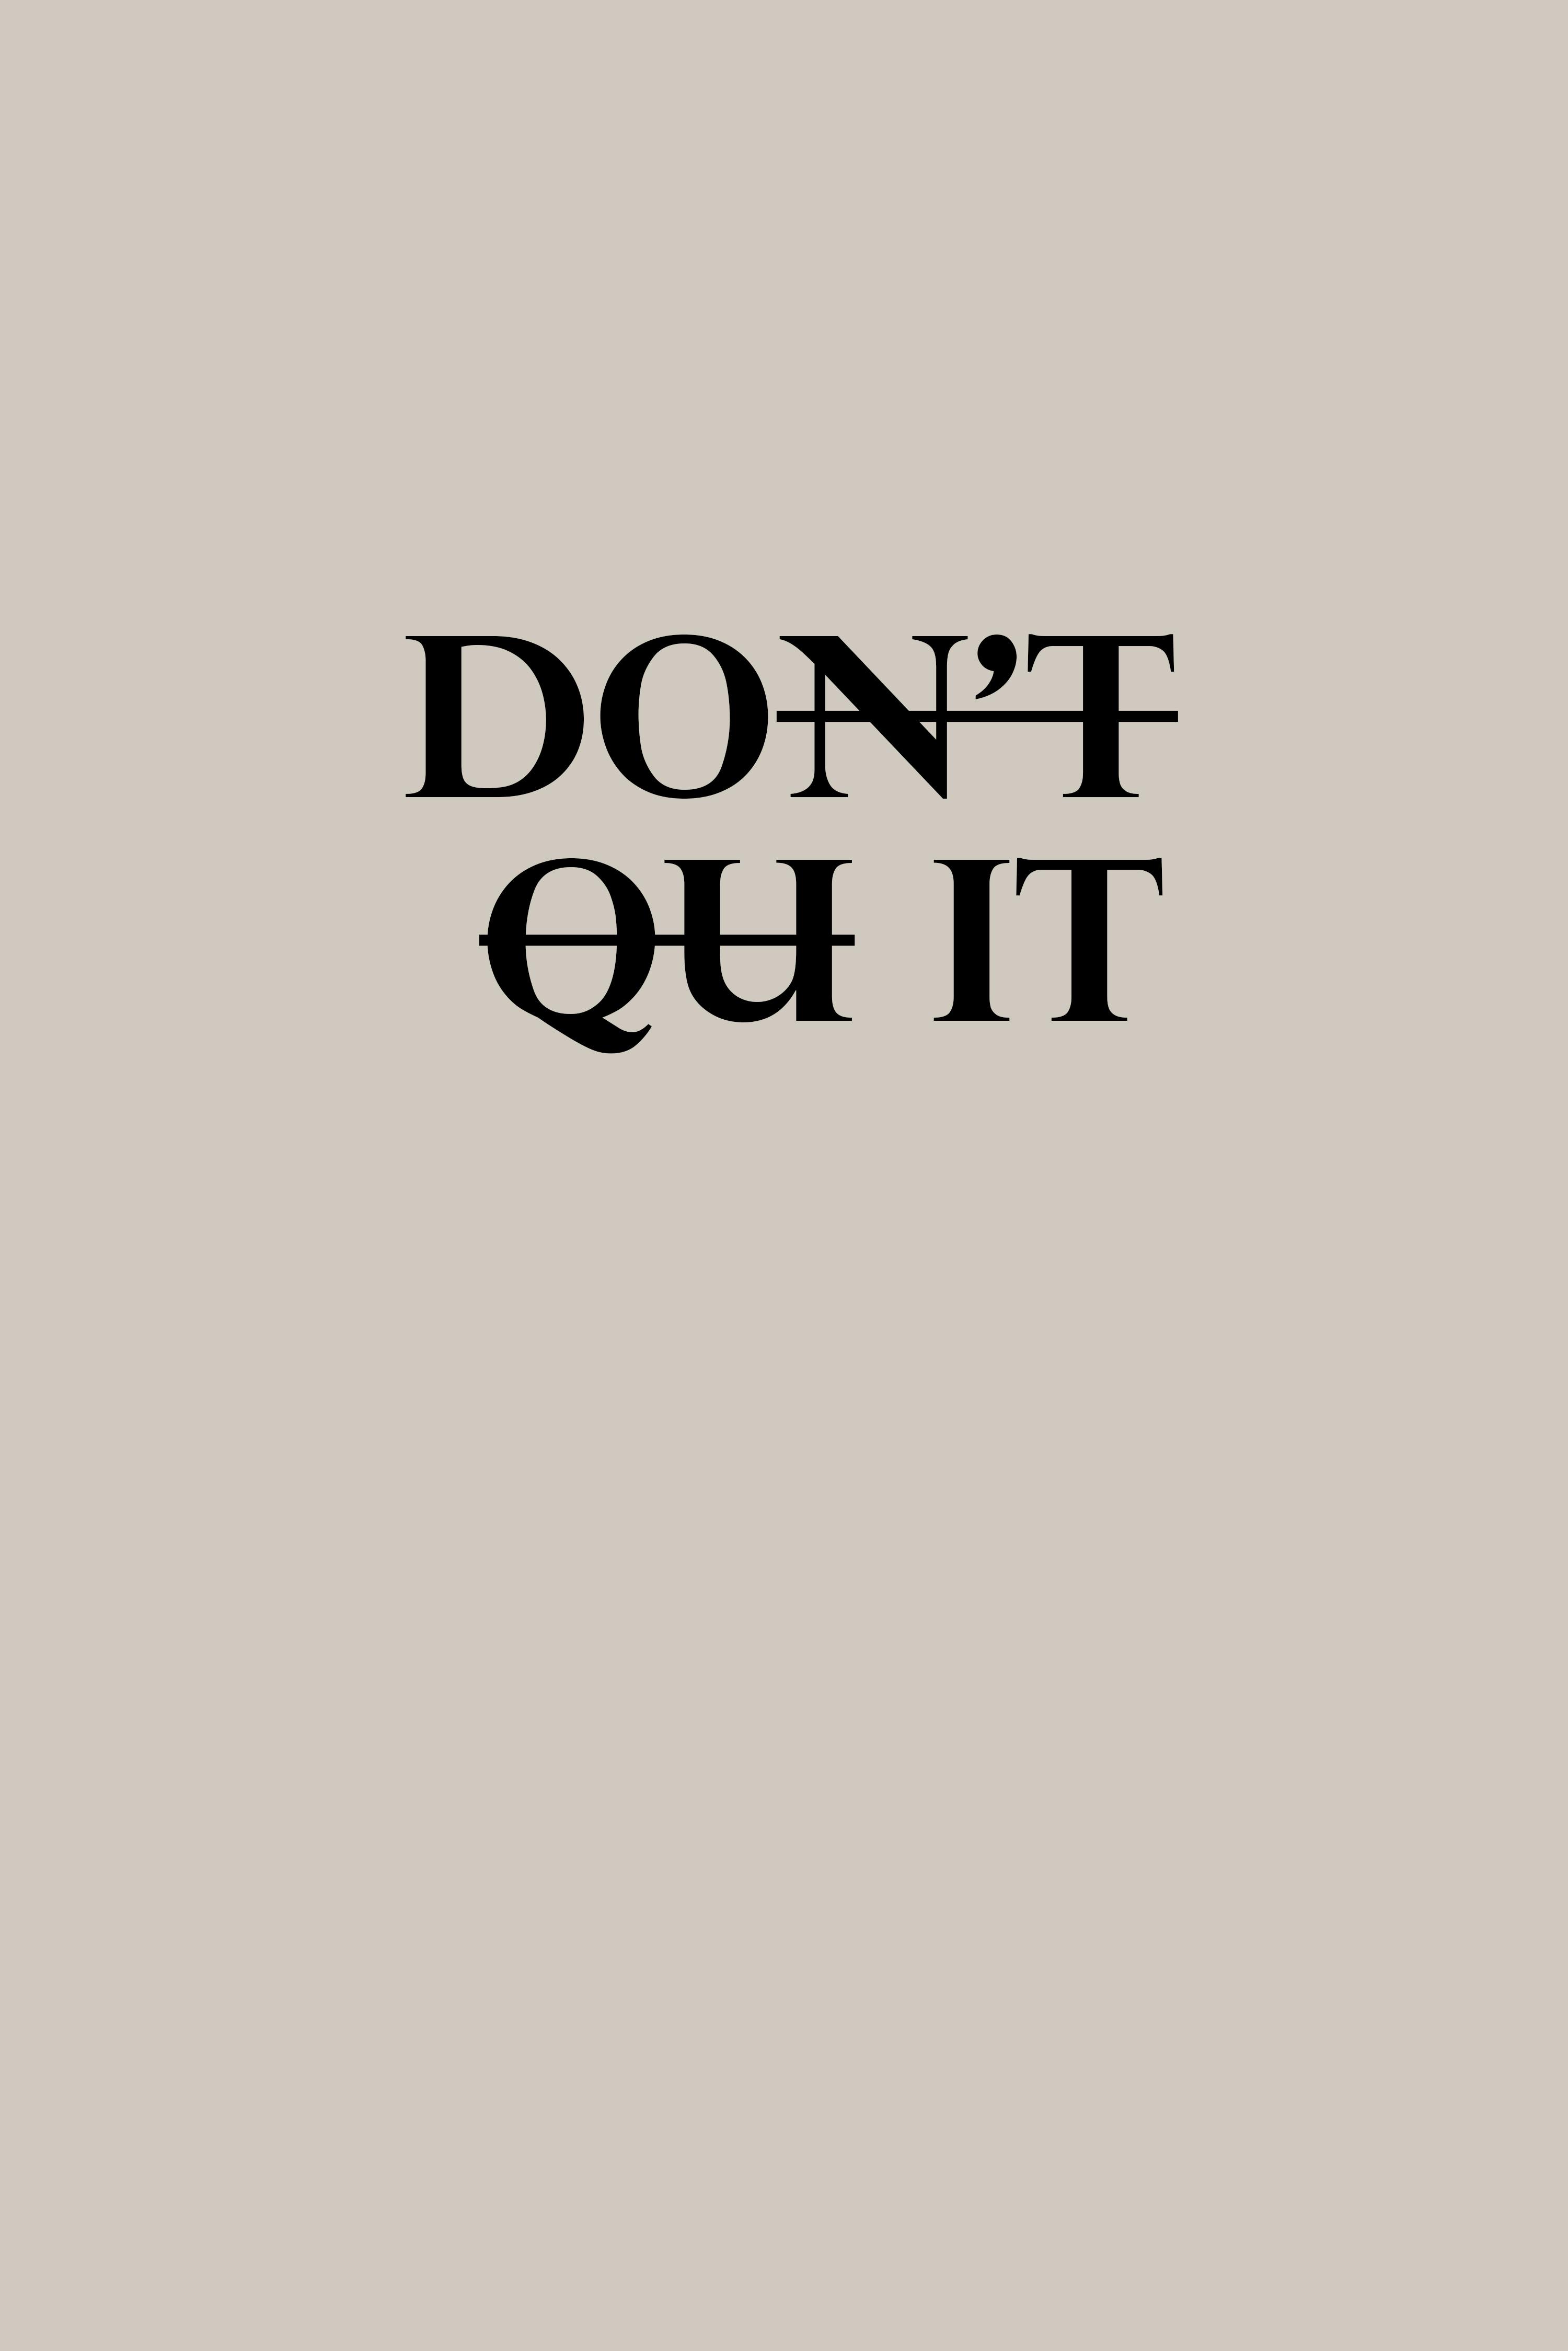 Top 999+ Encouraging Quotes Wallpaper Full HD, 4K✓Free to Use